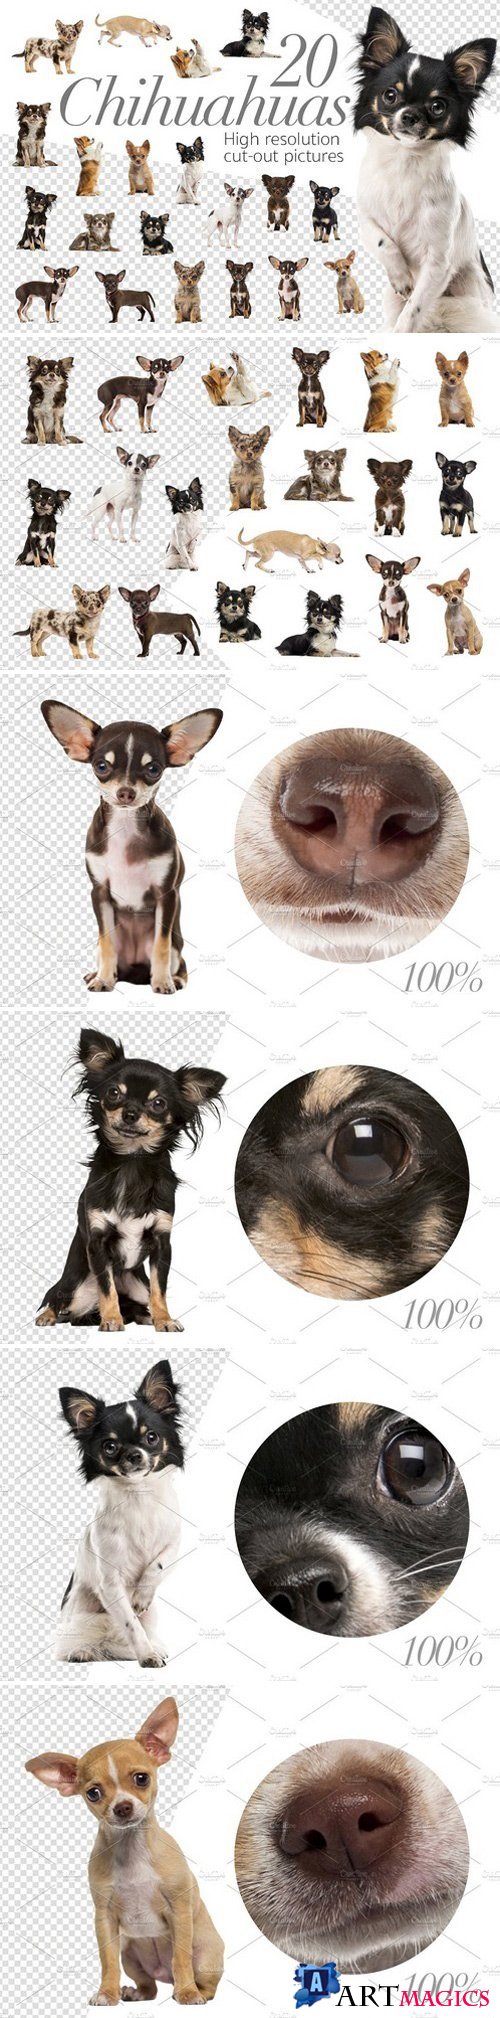 20 Chihuahuas - Cut-out Pictures 2042332